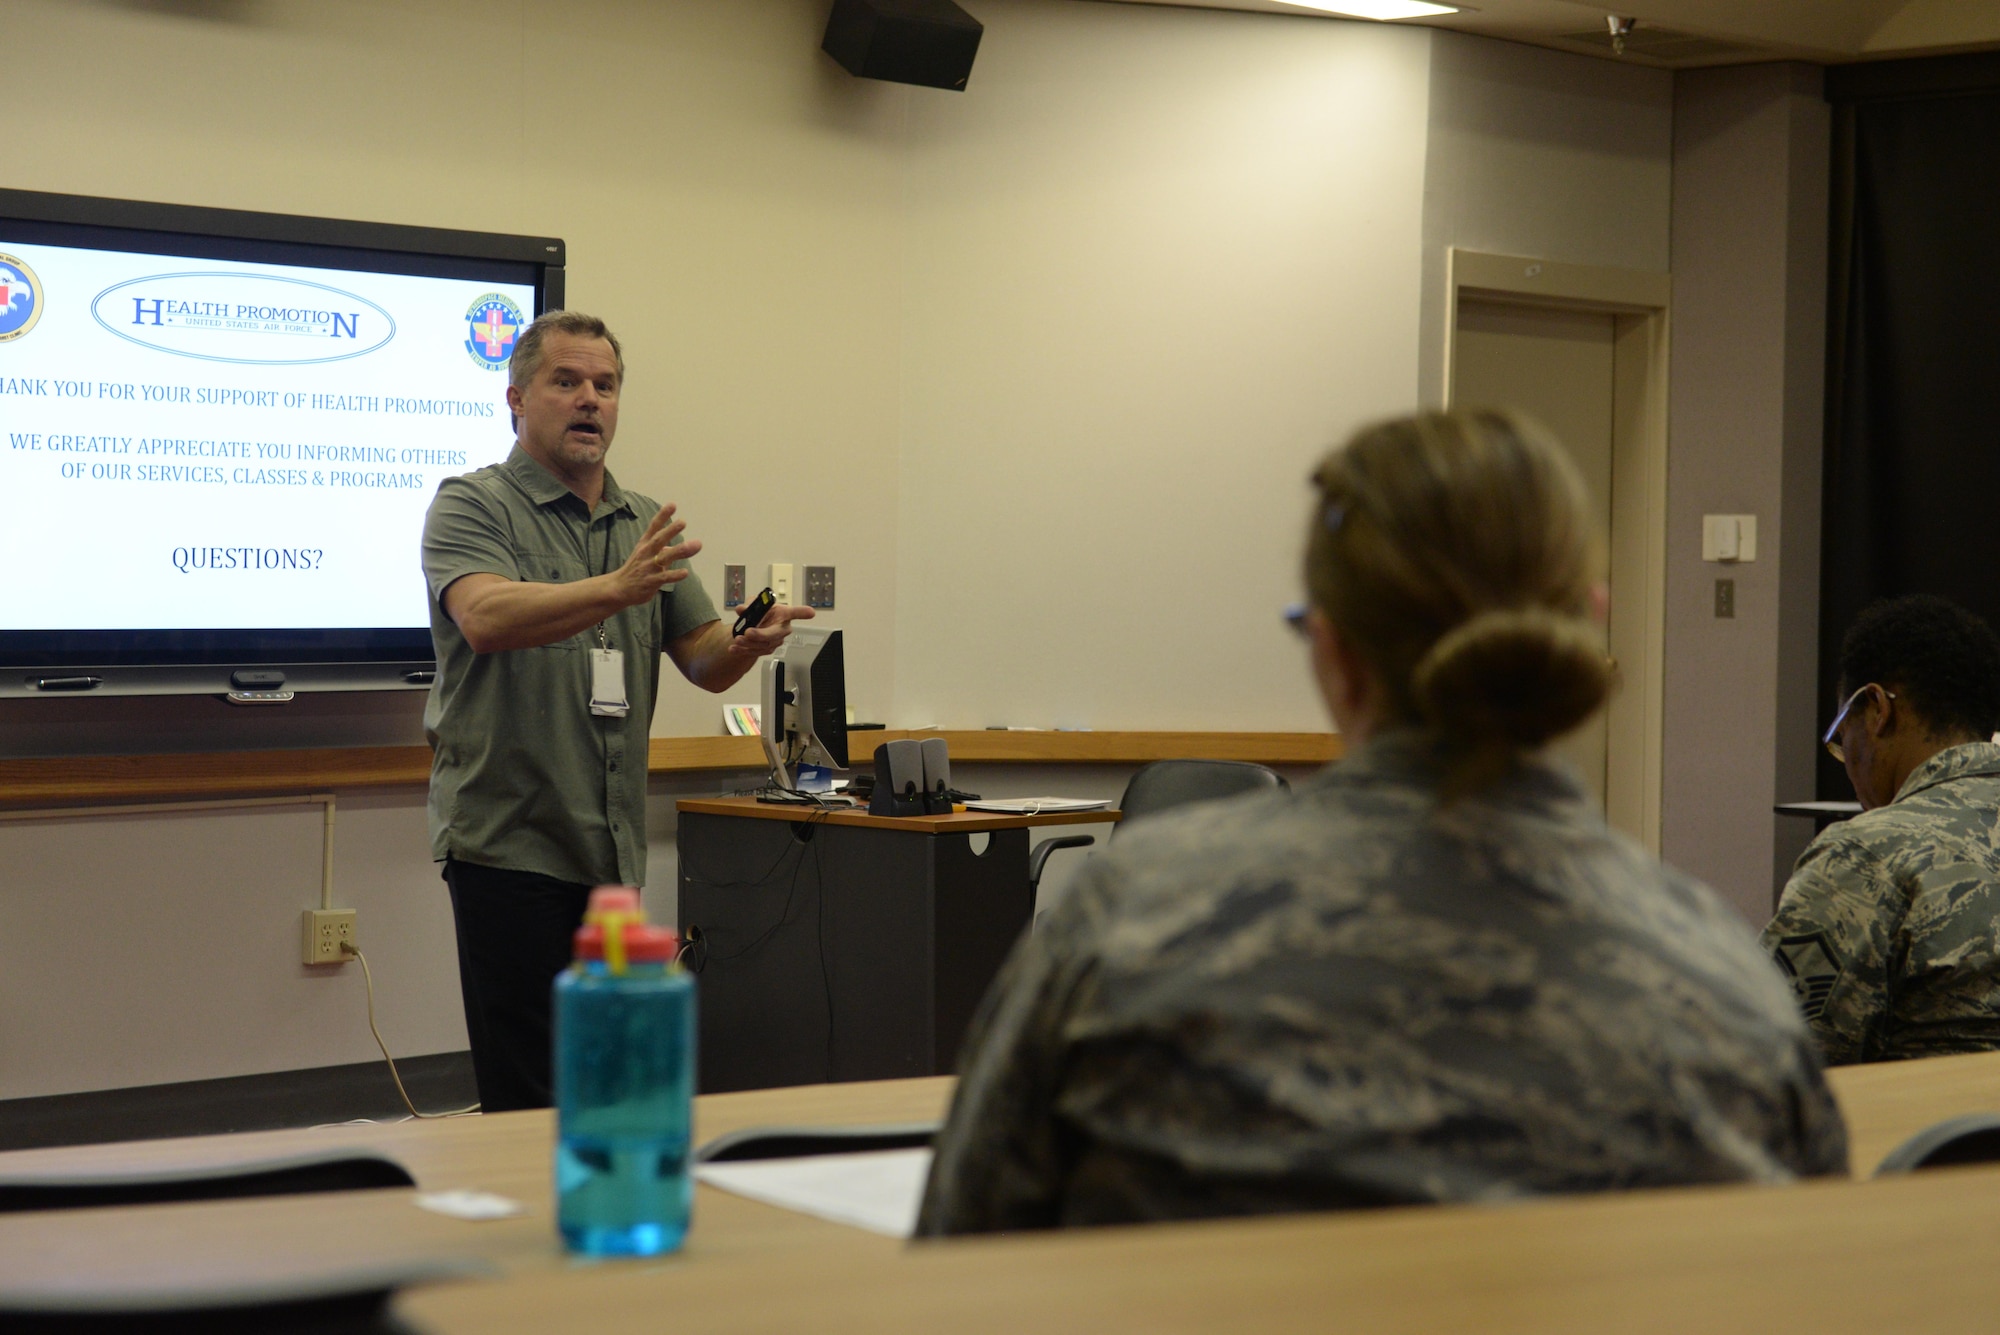 Roger Nelson, Health Promotion coordinator, leads a class about the programs now being offered at the new Health Promotion office, formerly the Health and Wellness Center, at the 55th Medical Groups education center on Nov. 22, 2017 on Offutt Air Force Base, Neb.